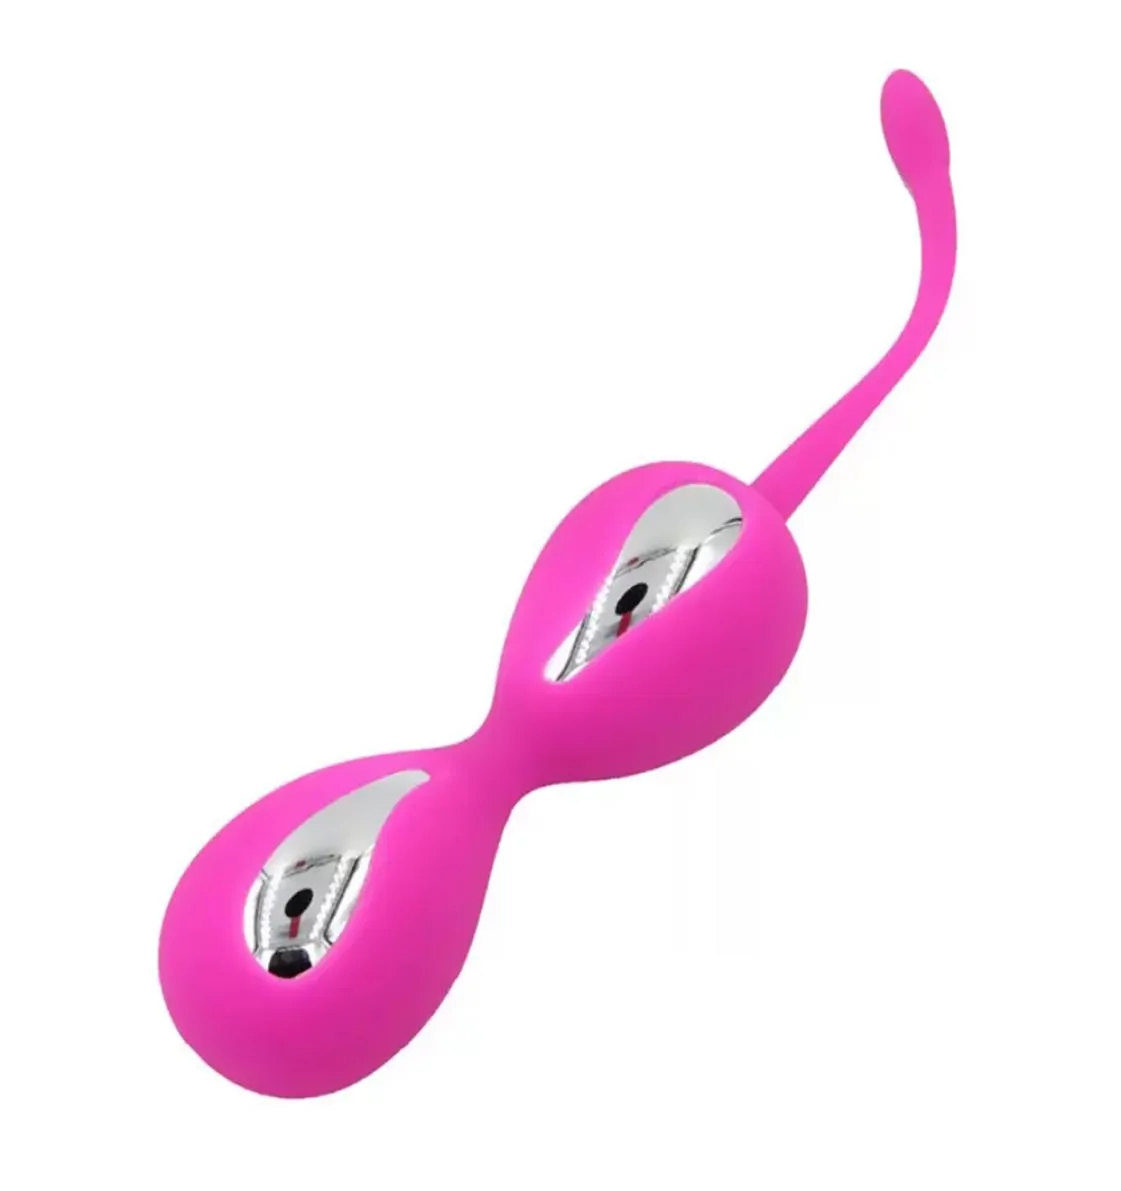 New Silicone Covered Smart Love Egg Ben Wa Balls Anal Bead Ball Kegel Vagina Trainer Sex Product For Women Adult Sex Toys4939678